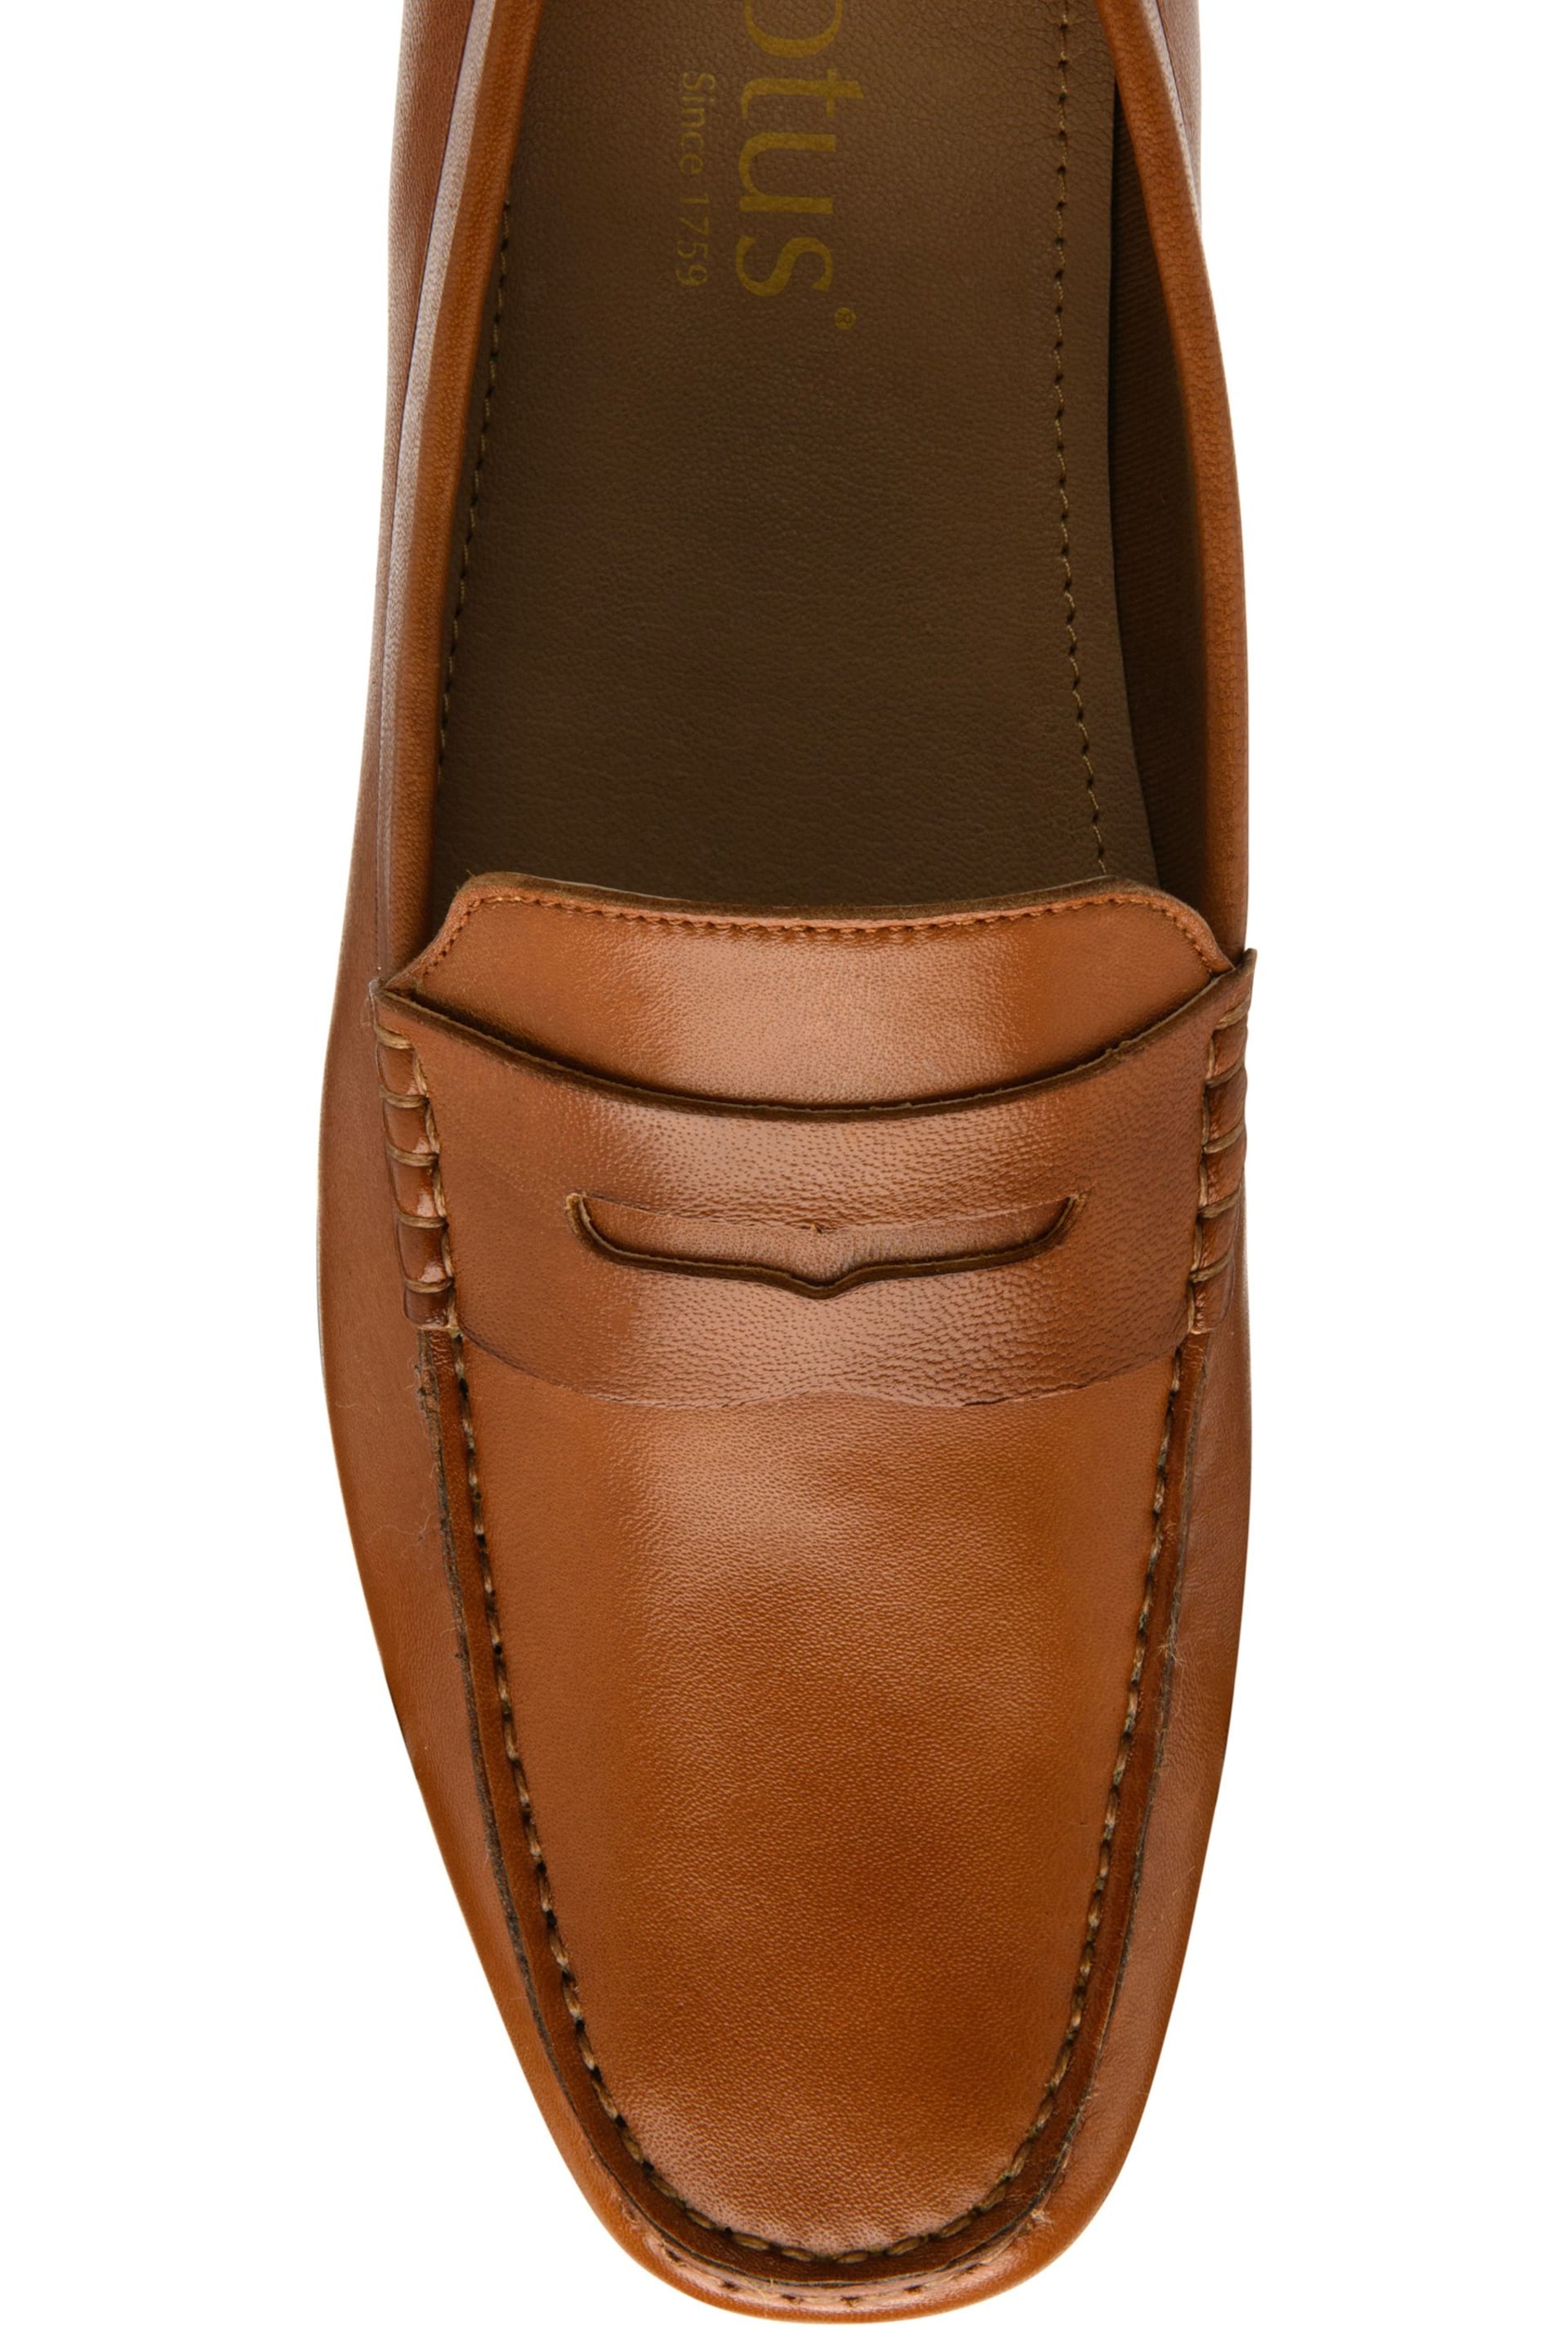 Lotus Brown Leather Loafers - Image 4 of 4